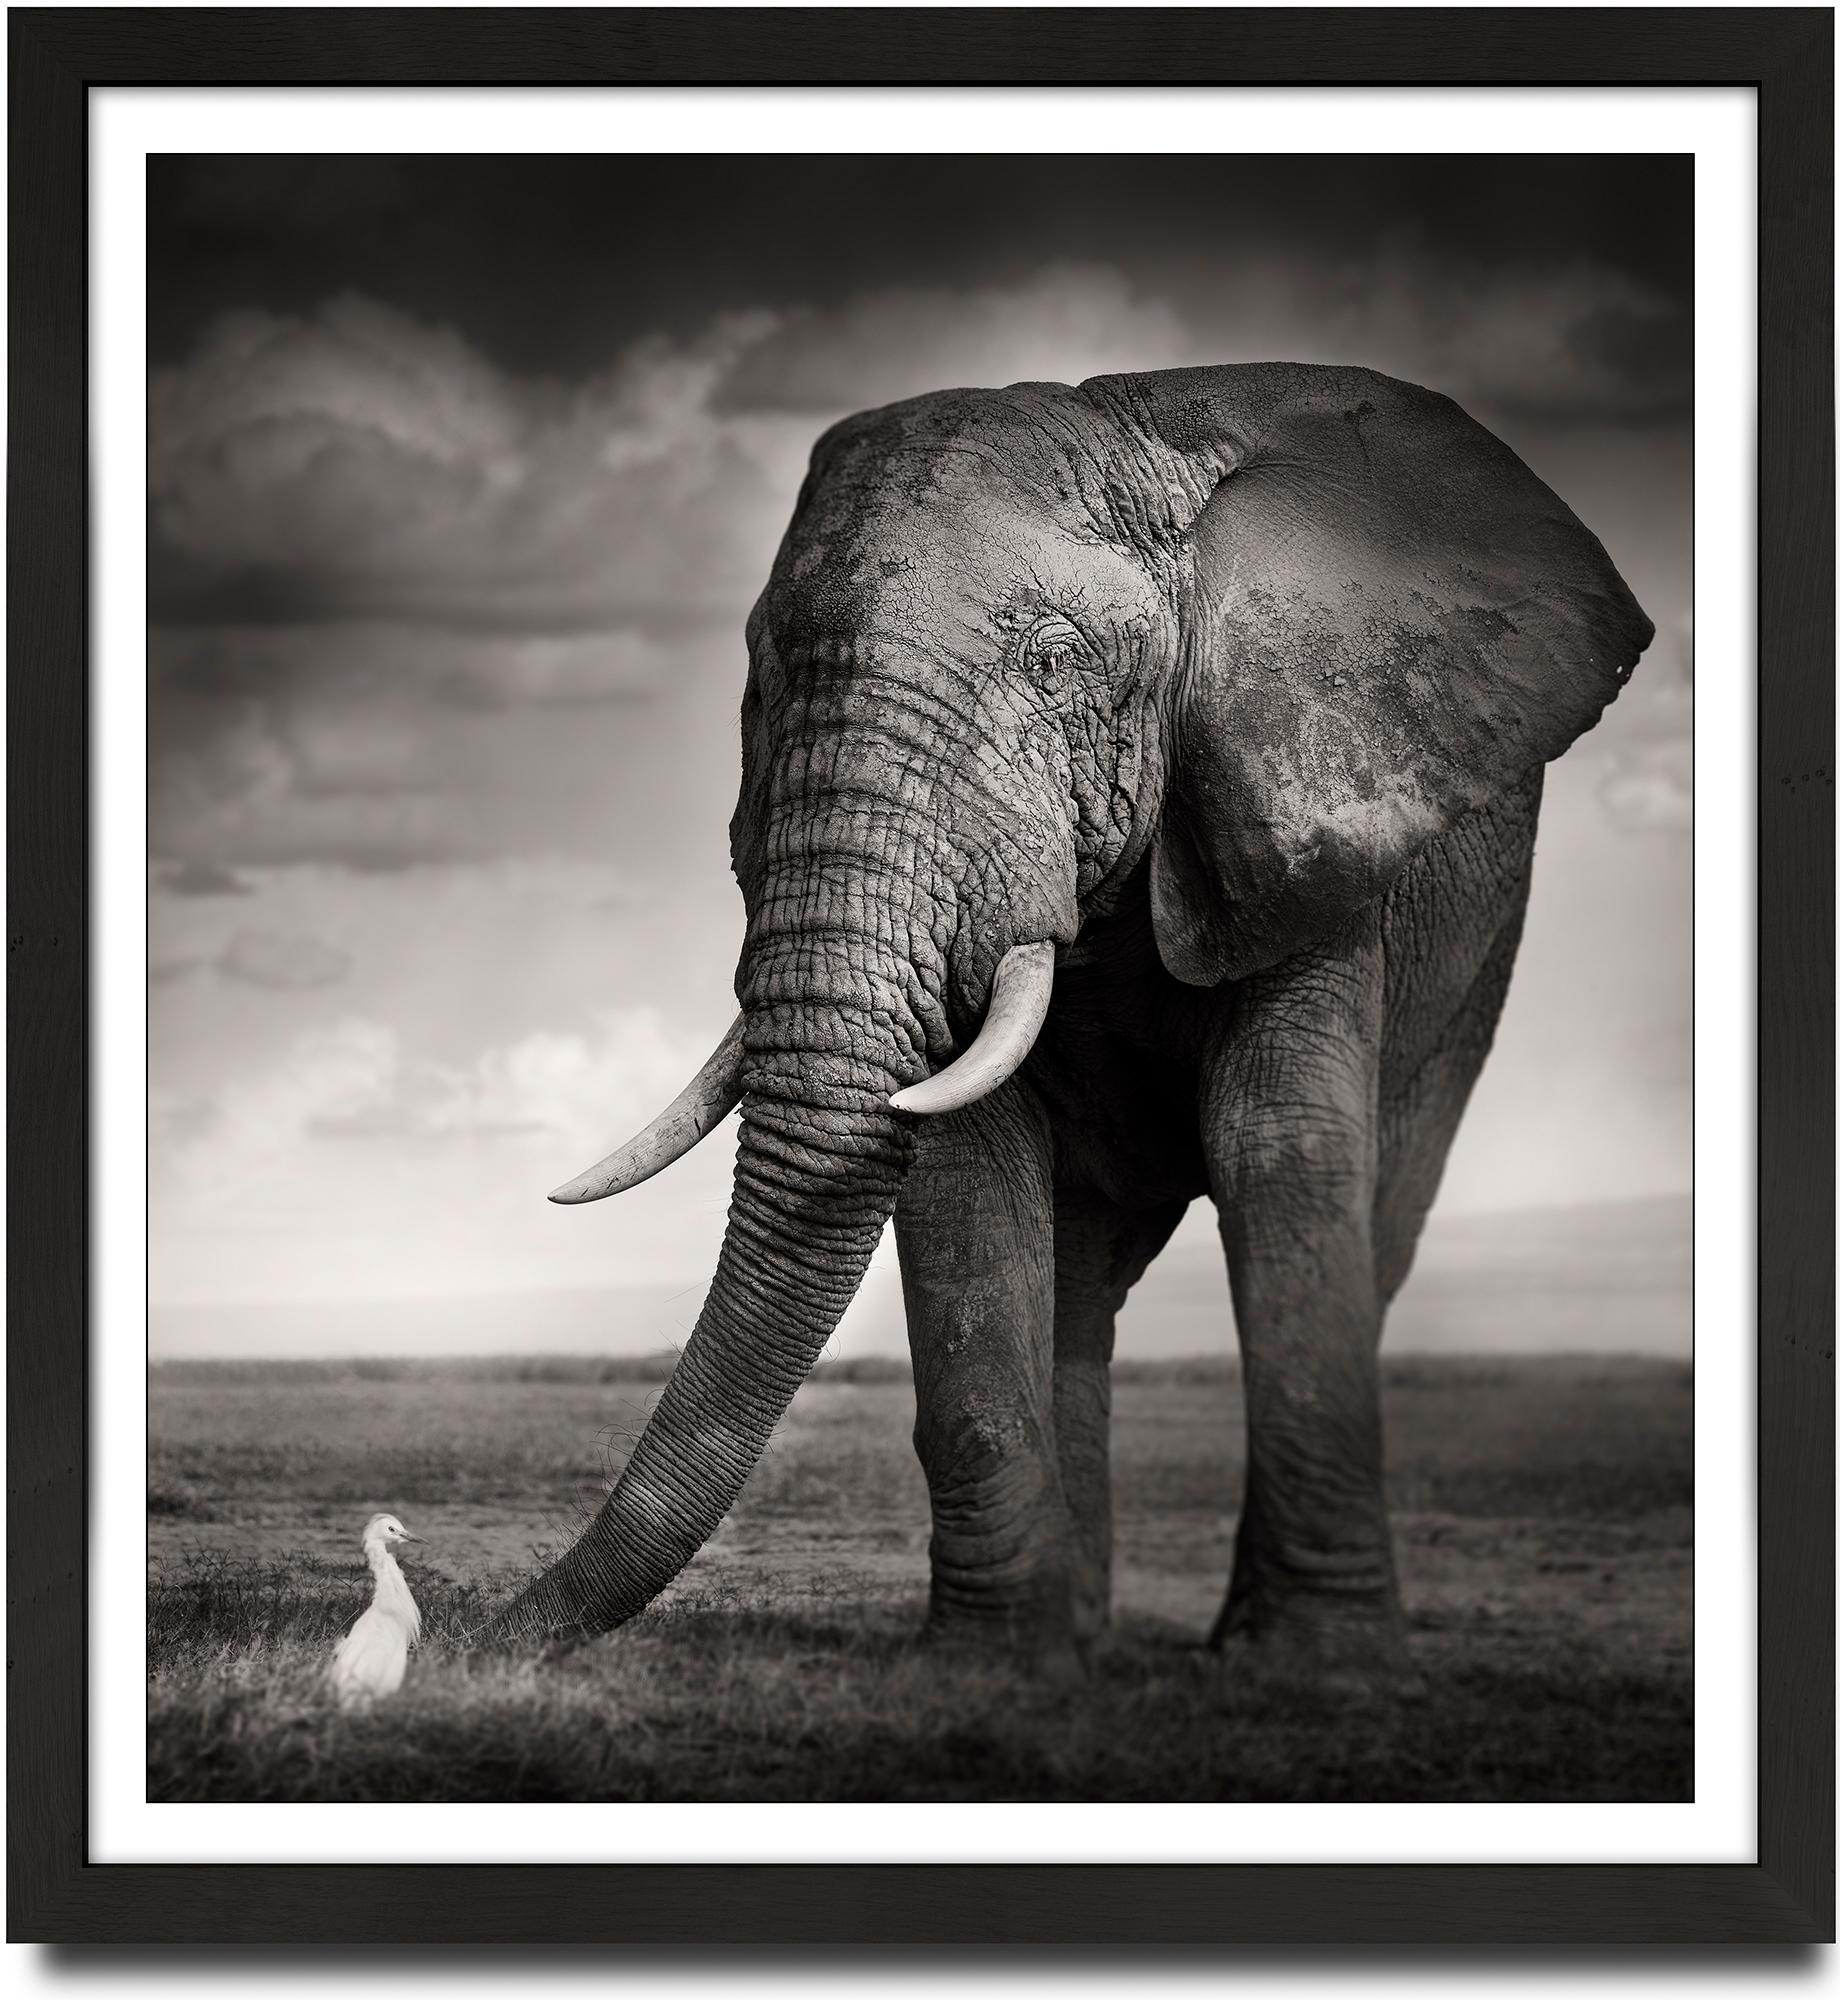 The Bull and the Bird, animal, wildlife, black and white photography, elephant - Photograph by Joachim Schmeisser